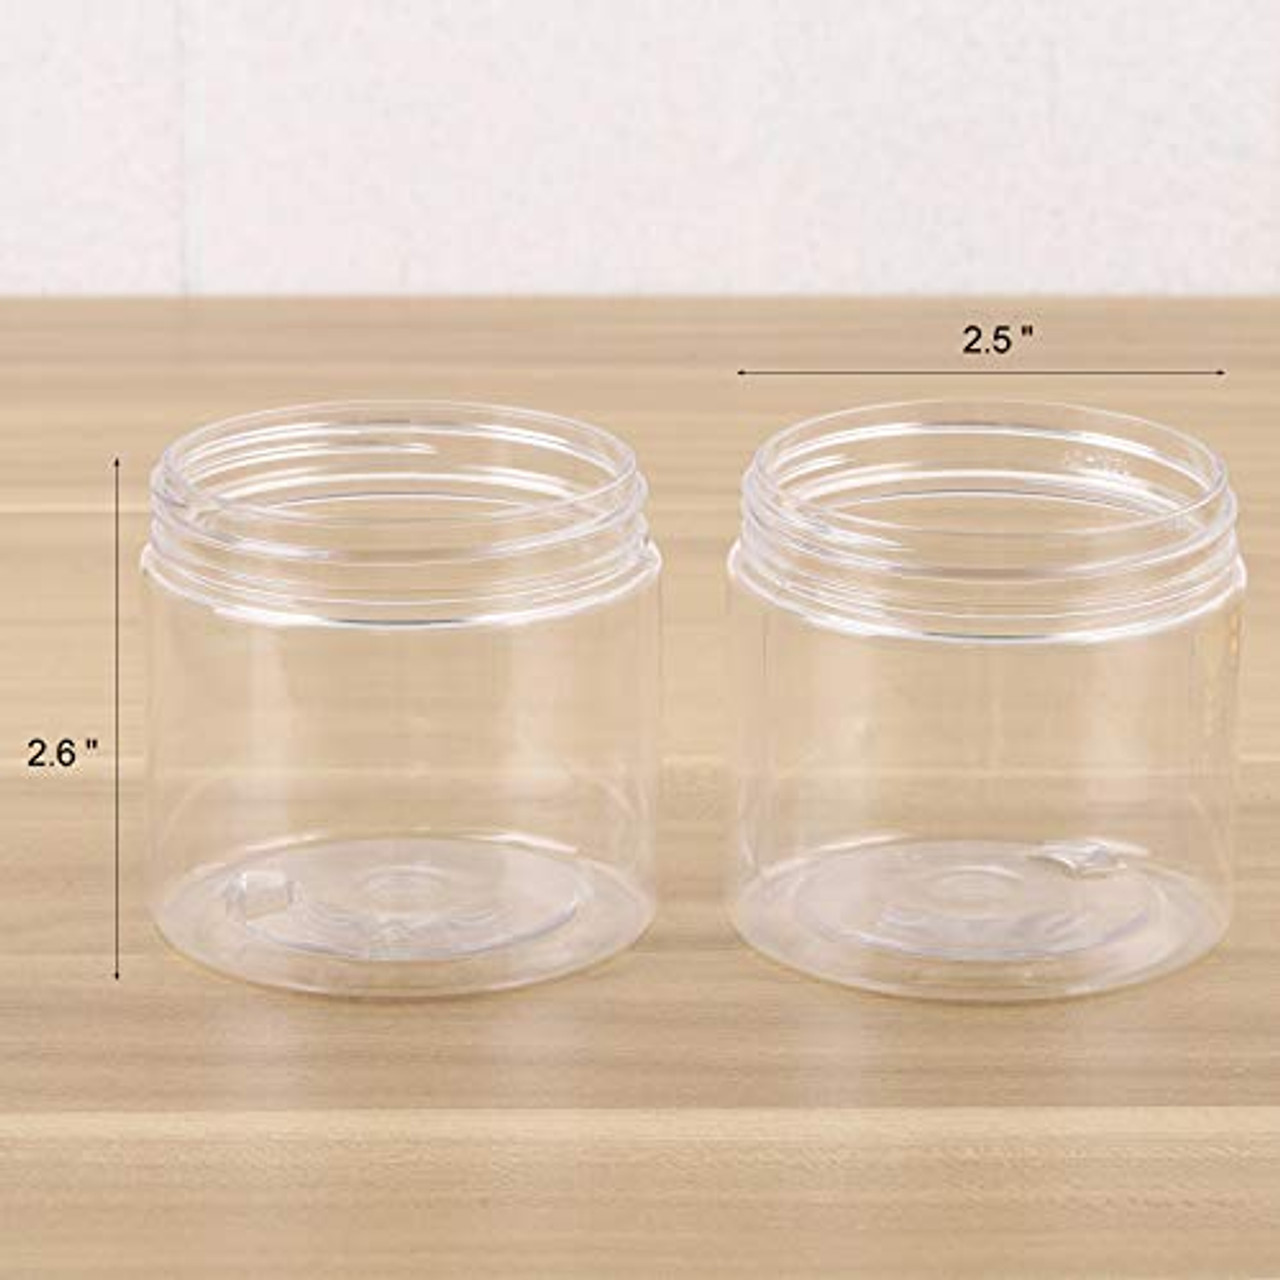 35-Pack 1.2 oz Clear Plastic Jars with Lids for Beads, Beauty Products -  Small Empty Containers for Slime Supplies and Ingredients